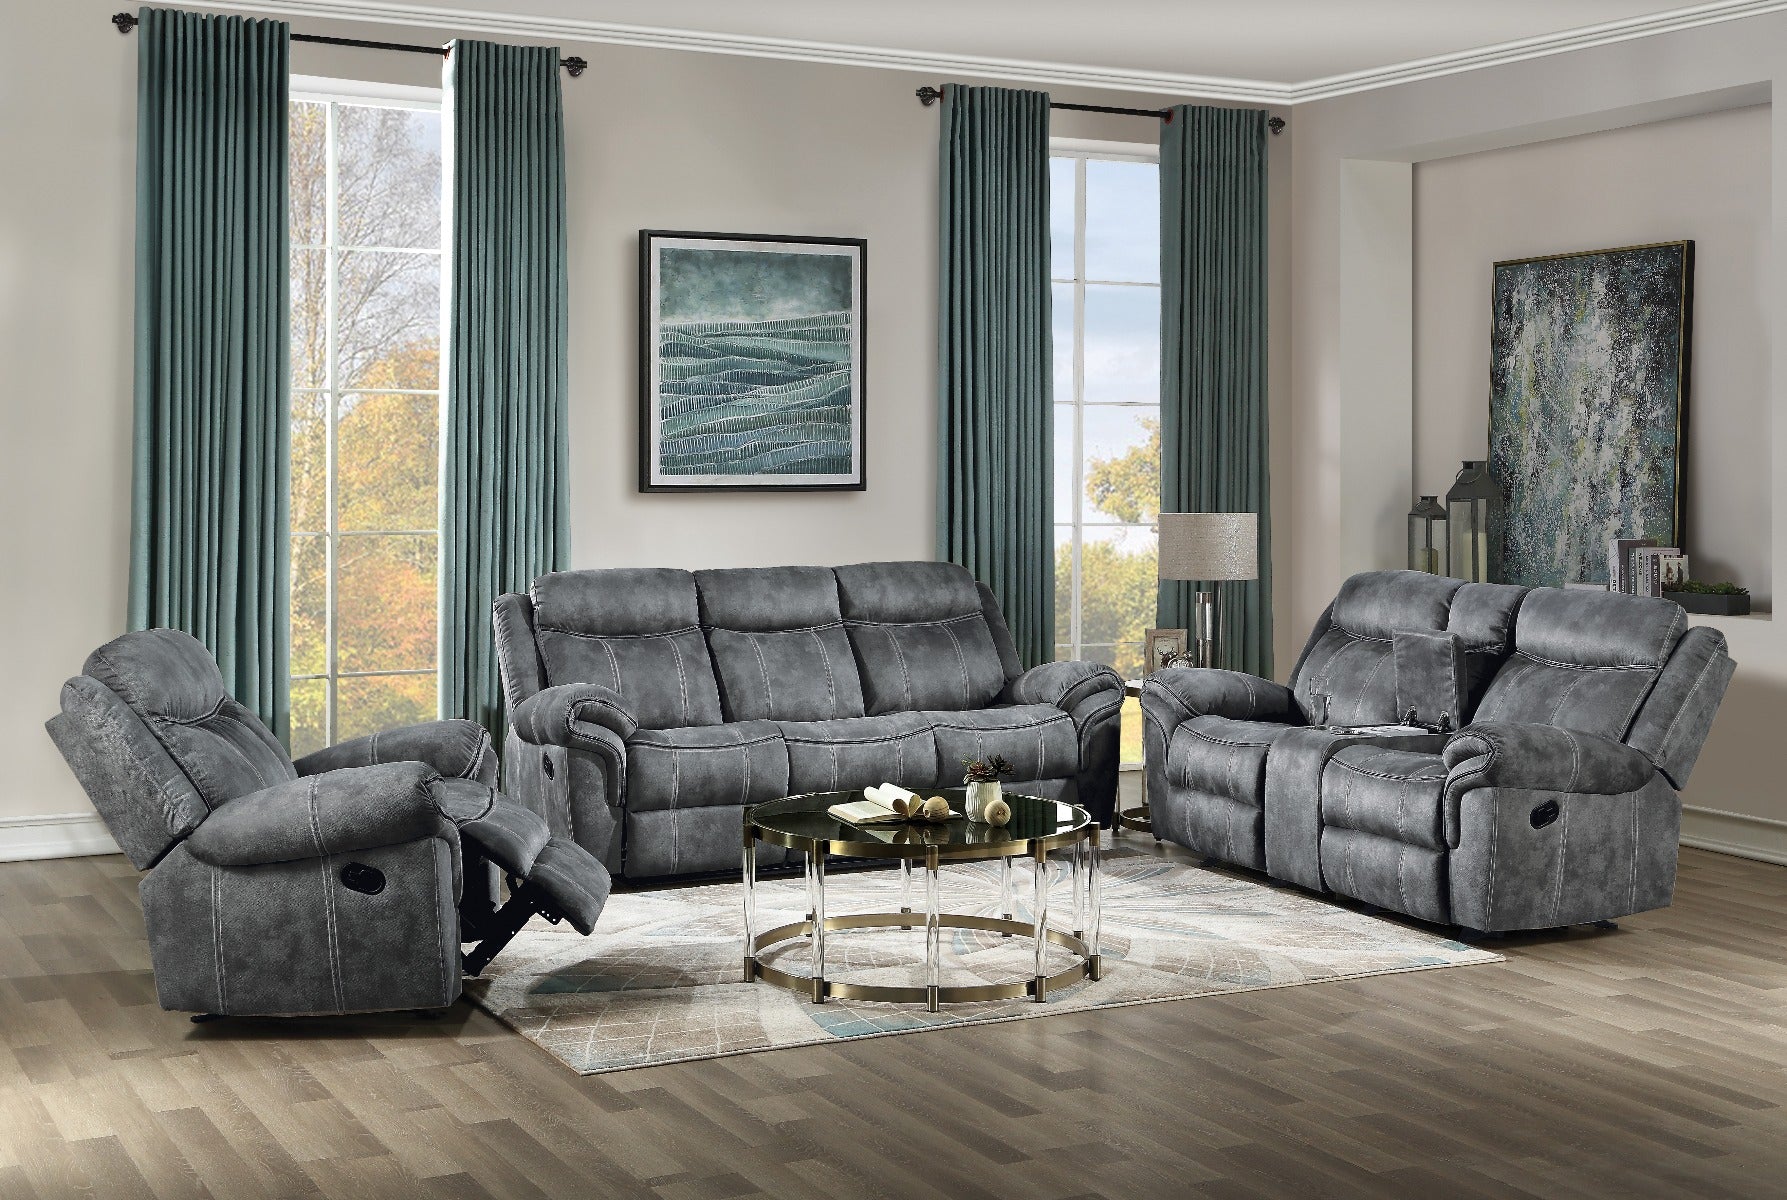 ACME Furniture Sofas & Couches - Loveseat w/USB Dock & Console (Glider & Motion), 2-Tone Gray Velvet 55026